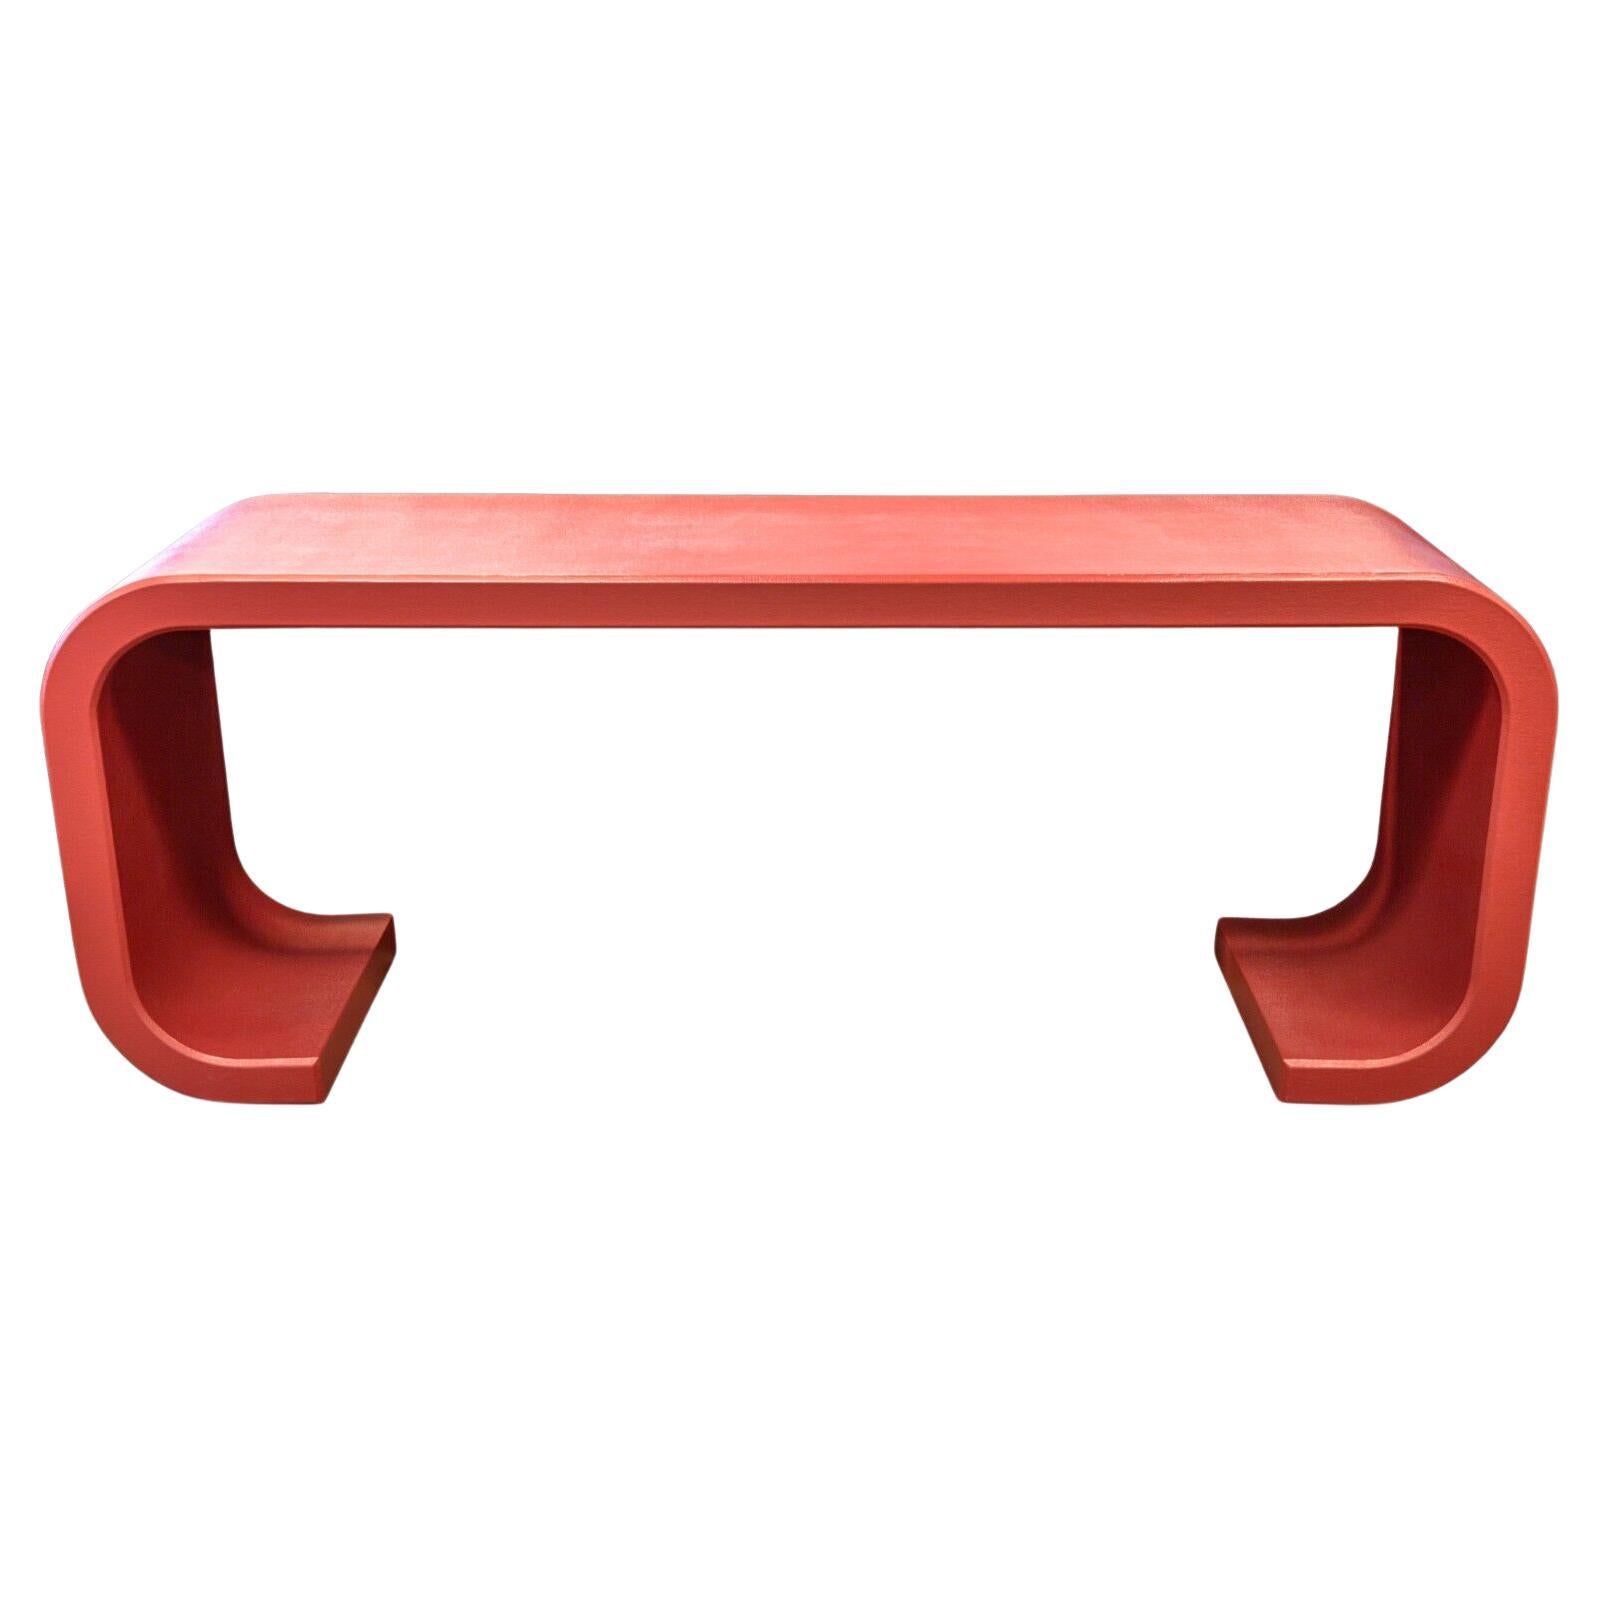 The Moderns Console Table cascade rouge Memphis Style